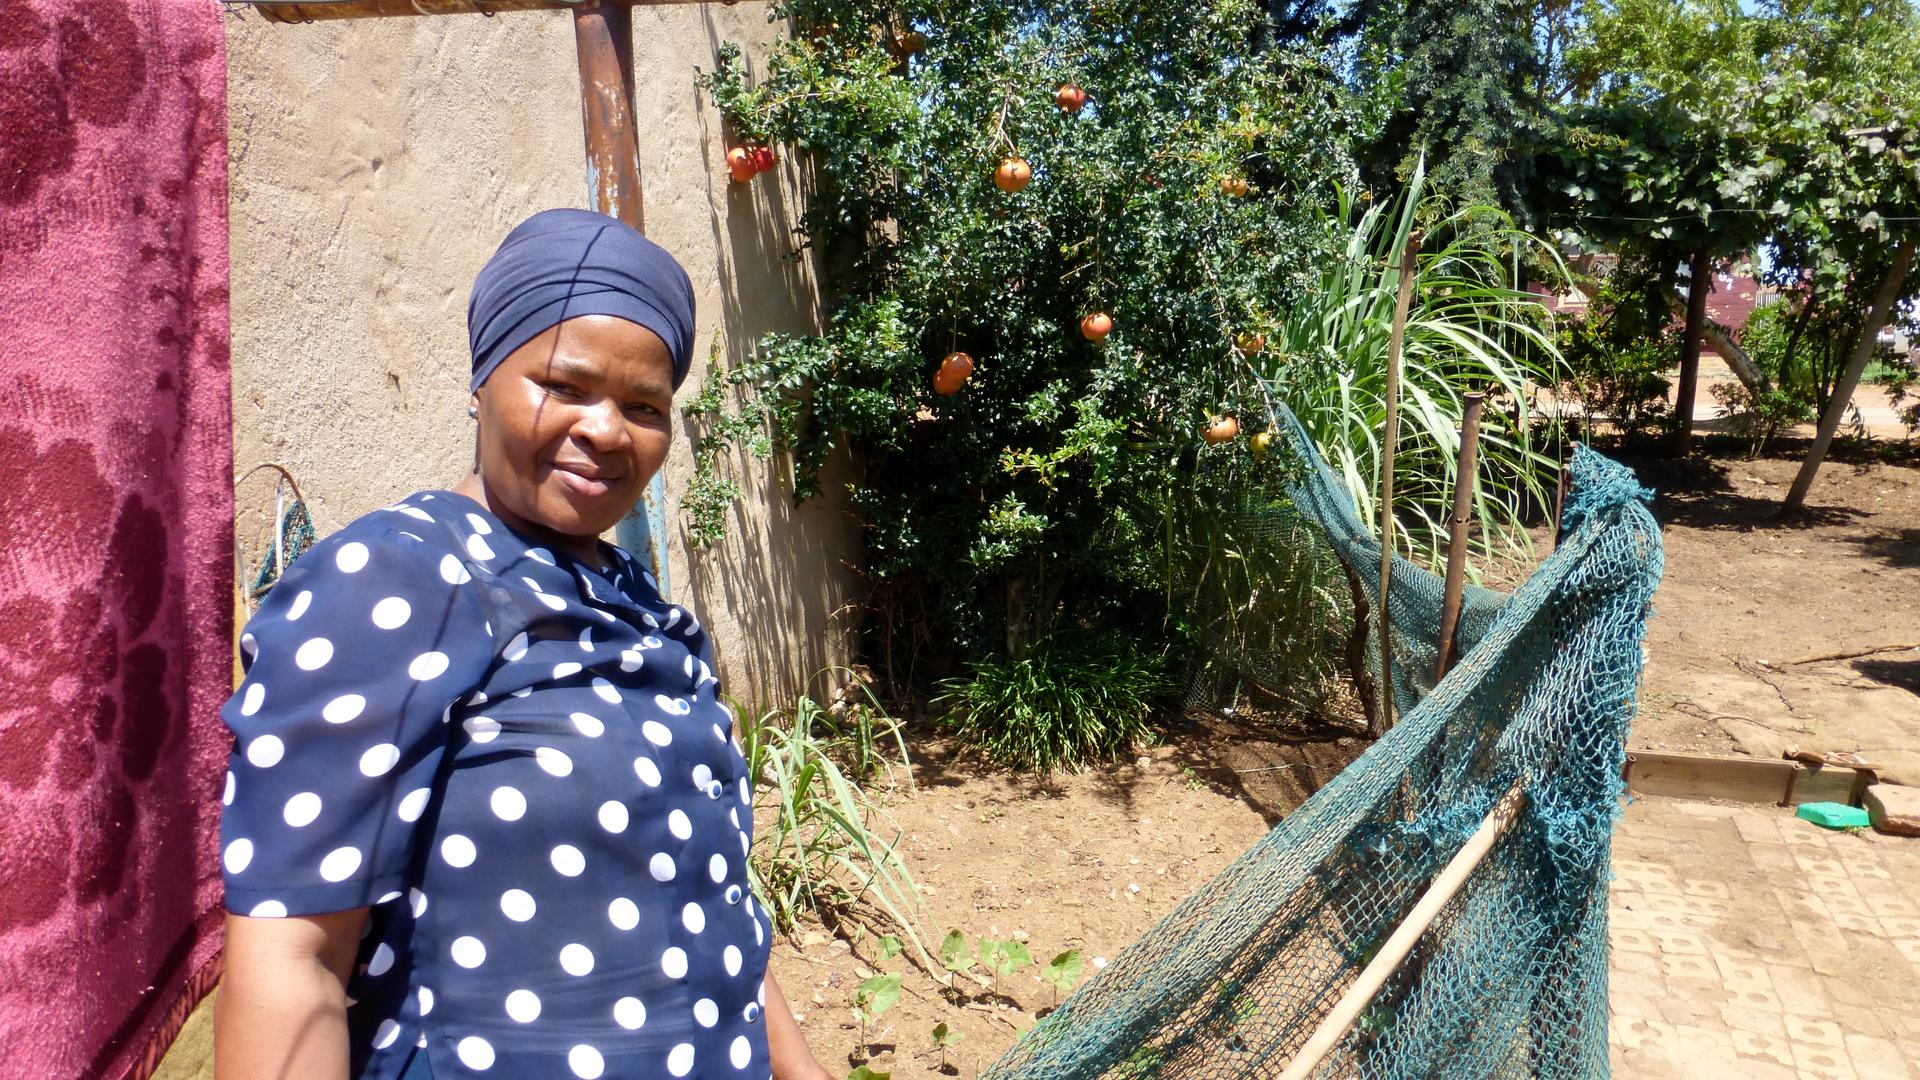 Mavis, a housekeeper from the Pretoria township of Mamelodi, depends on her garden to help provide for her five children and seven grandchildren. But with this year's region-wide drought, her garden is just a dusty patch of seedlings. “I want rain every d